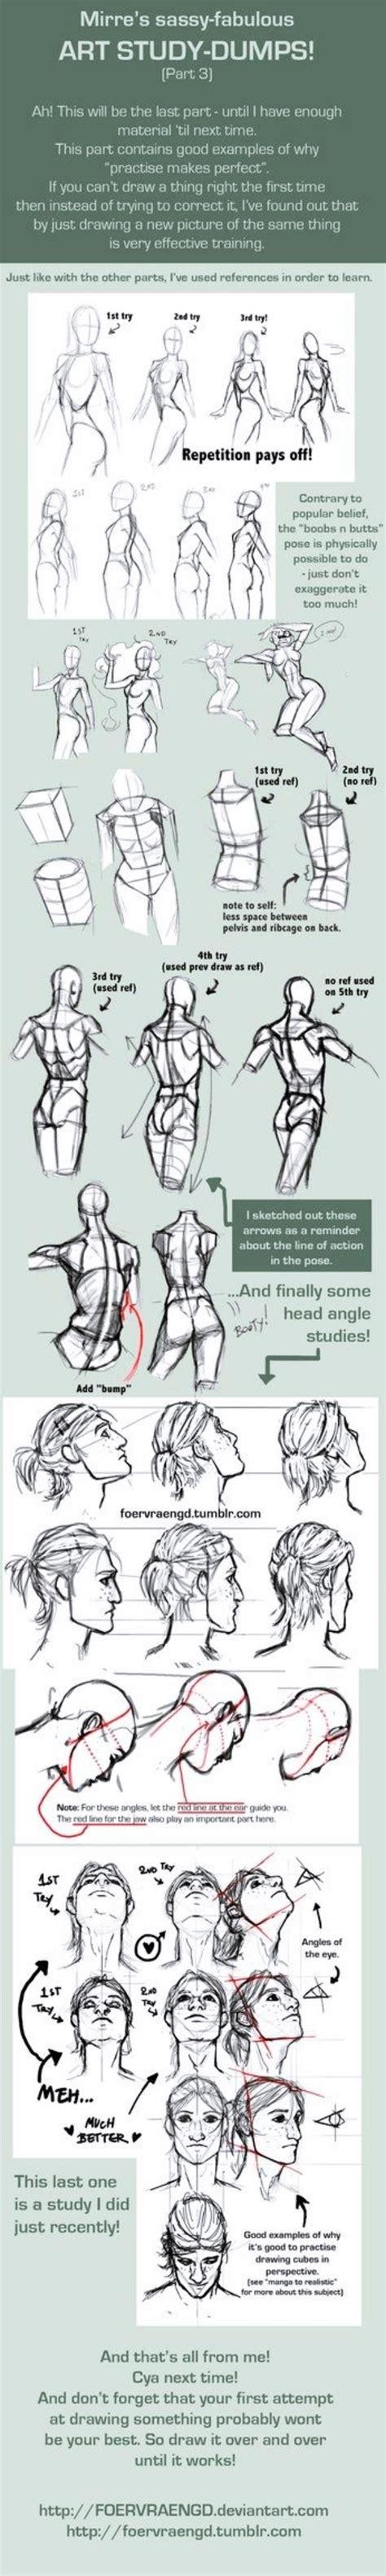 How To Draw Body Shapes 30 Tutorials For Beginners Bored Art